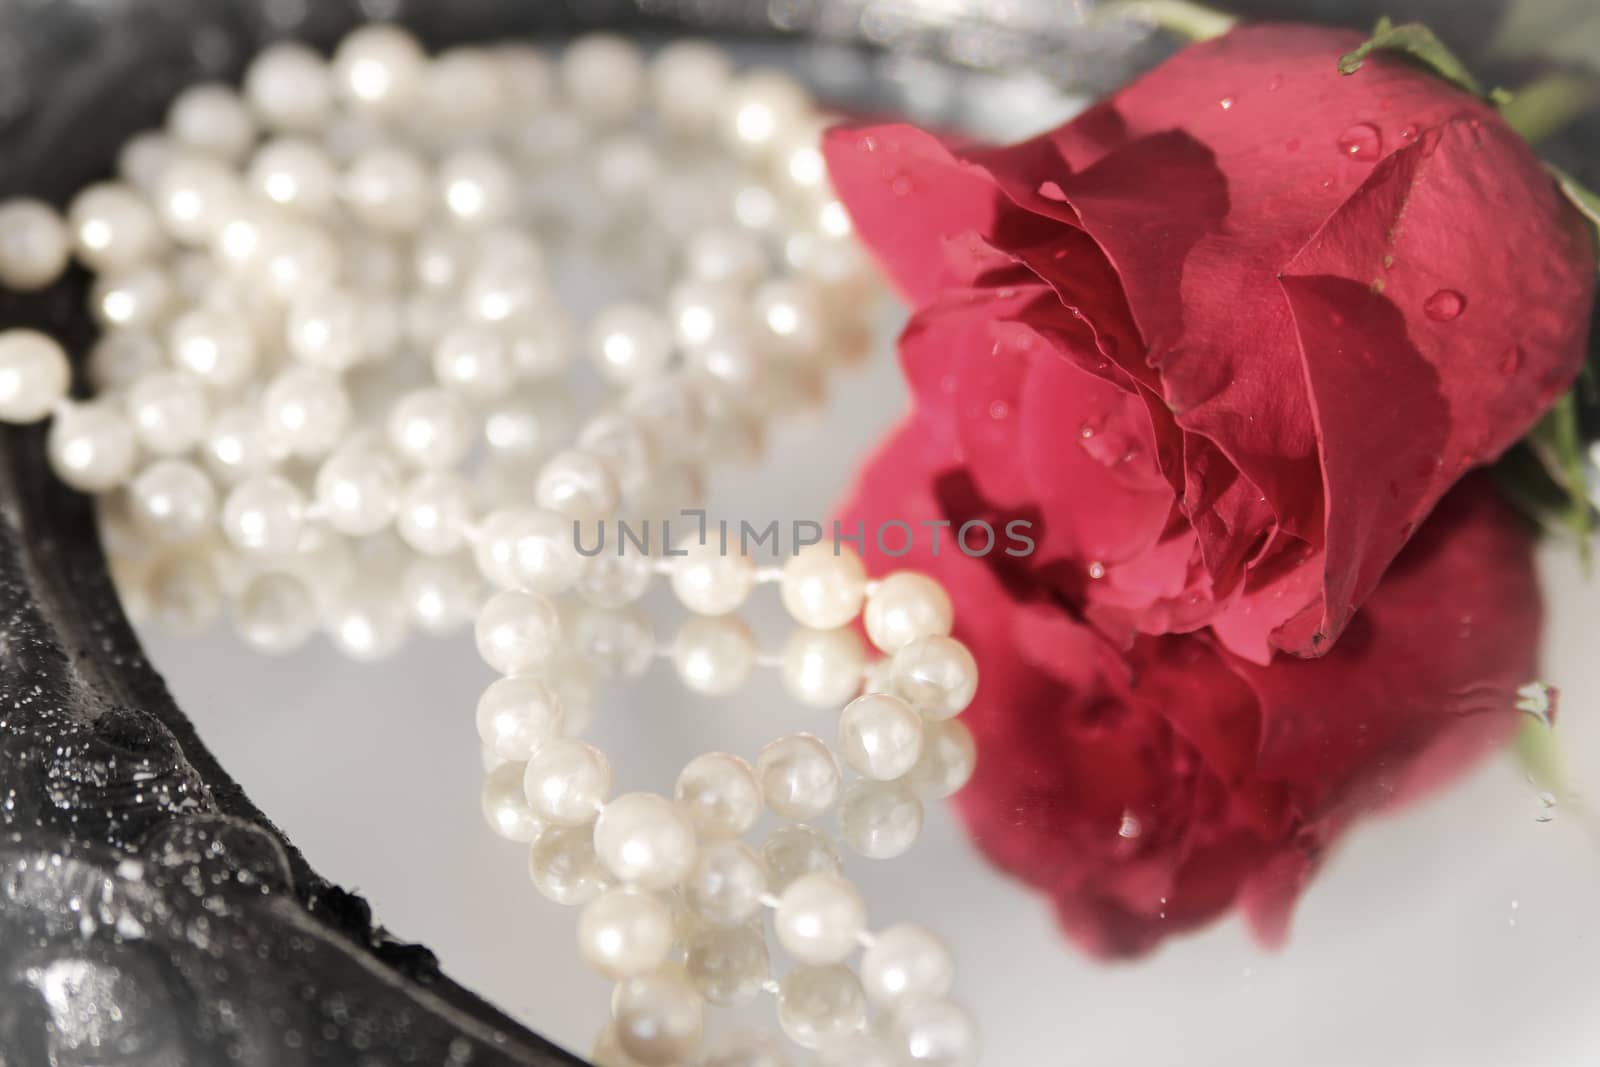 Romantic pink rose and pearls on a mirror with reflection and shallow depth of field